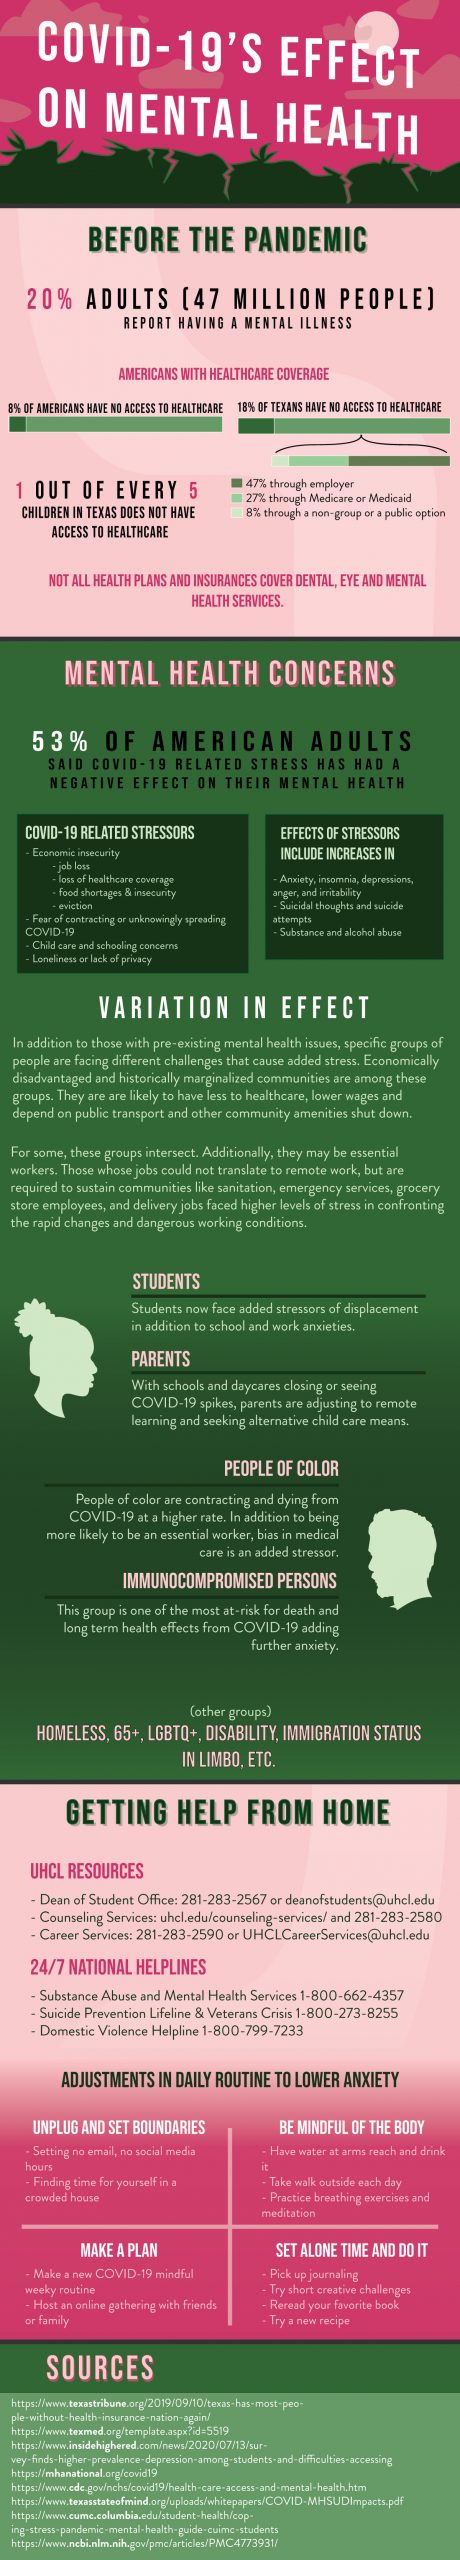 INFOGRAPHIC: Infographic on mental health and COVID-19. Infographic by The Signal Online Editor Alyssa Shotwell.